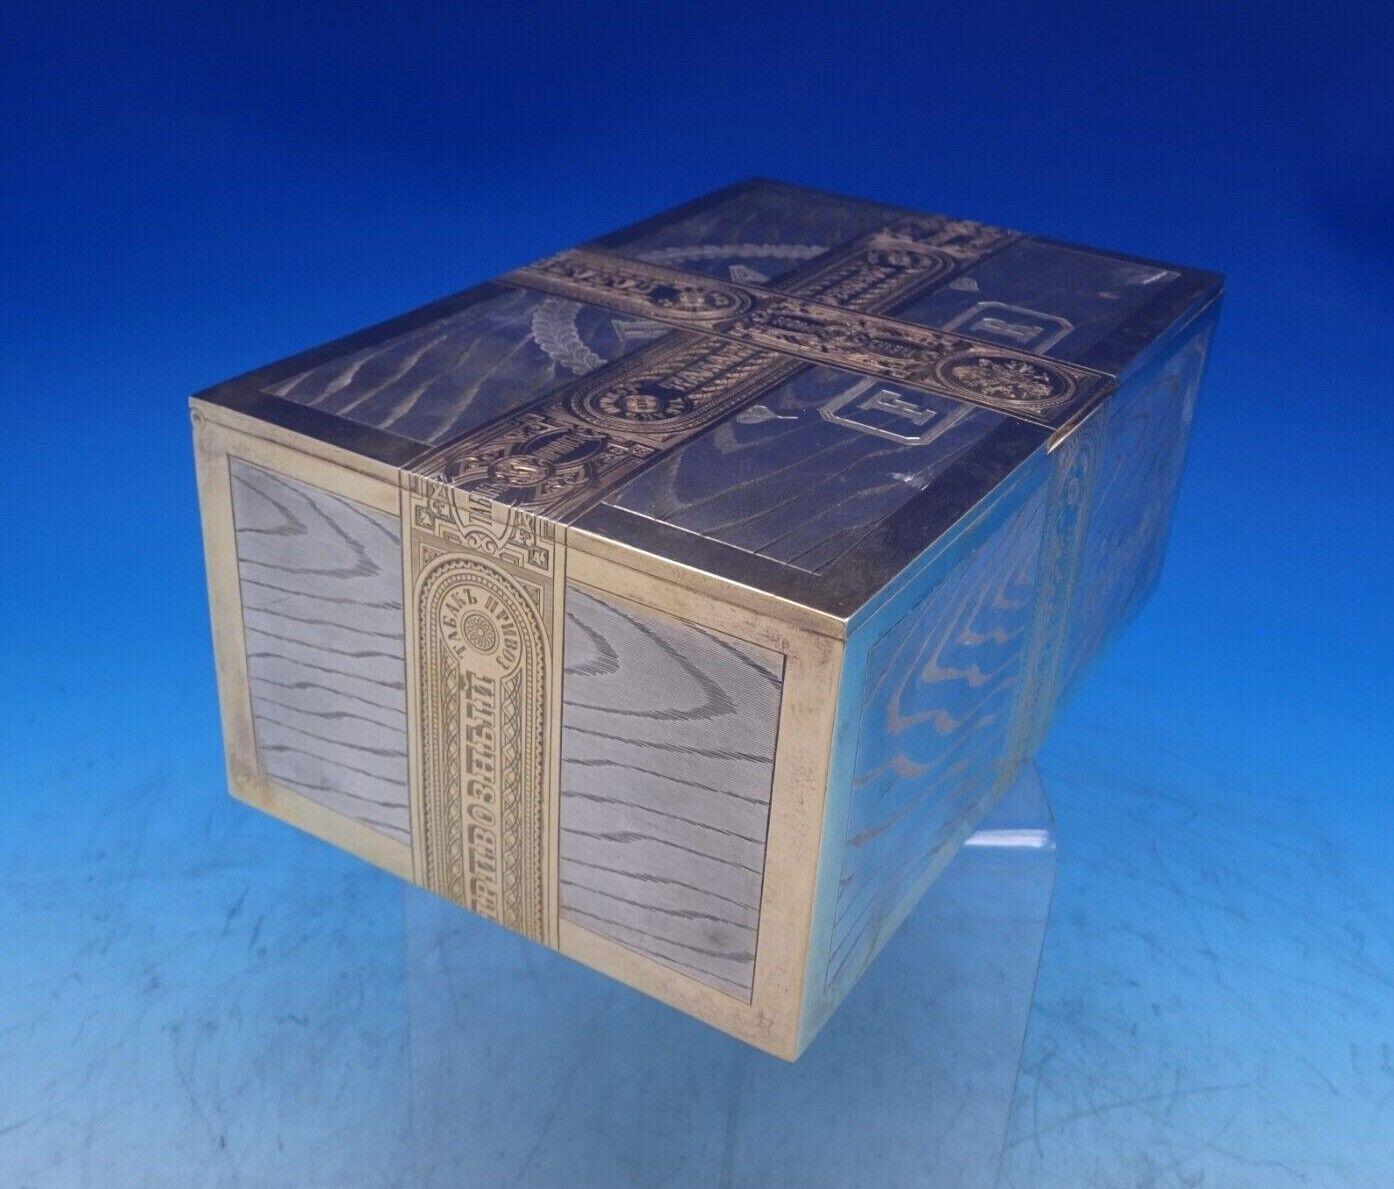 MH

Extraordinary MH Russian .875 silver cigar box dated 1886, assay IYS (Ivan Yev Stigneev). This box features trompe l'oeil wood panels with realistic grain. The center of lid is engraved and has crossed Russian tax bands in gilt, and has an